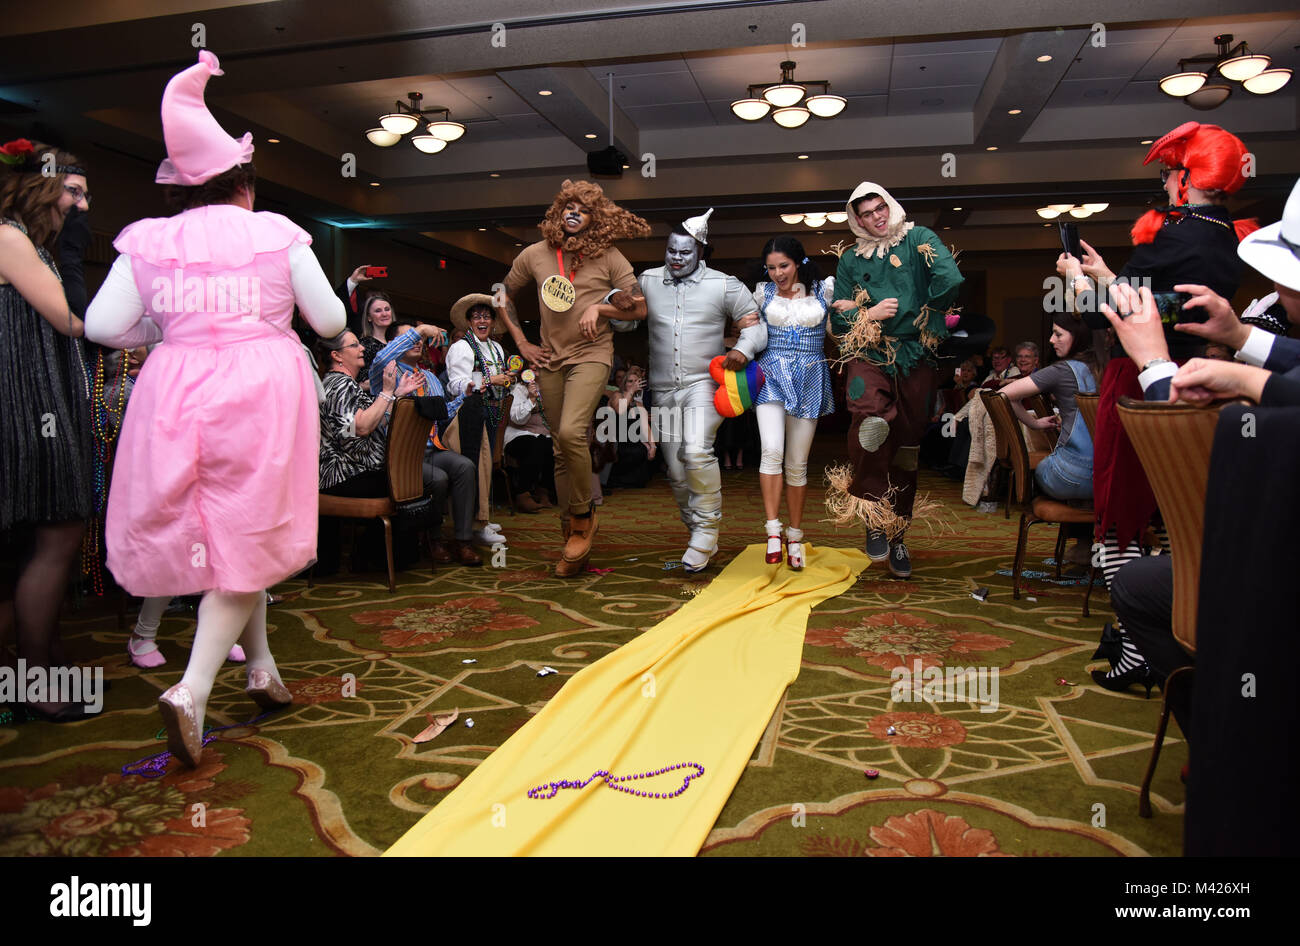 Members of the 81st Medical Operations Squadron portray the cast of The Wizard of Oz as they dance down the aisle during a Mardi Gras float contest at the 30th Annual Krewe of Medics Mardi Gras Ball at the Bay Breeze Event Center Feb. 3, 2018, on Keesler Air Force Base, Mississippi. The Krewe of Medics hosts a yearly ball to give Keesler Medical Center personnel a taste of the Gulf Coast and an opportunity to experience a traditional Mardi Gras. The theme for this year's ball was Read It-Be It. The 81st MDOS won first place in the float contest. (U.S. Air Force photo by Kemberly Groue) Stock Photo